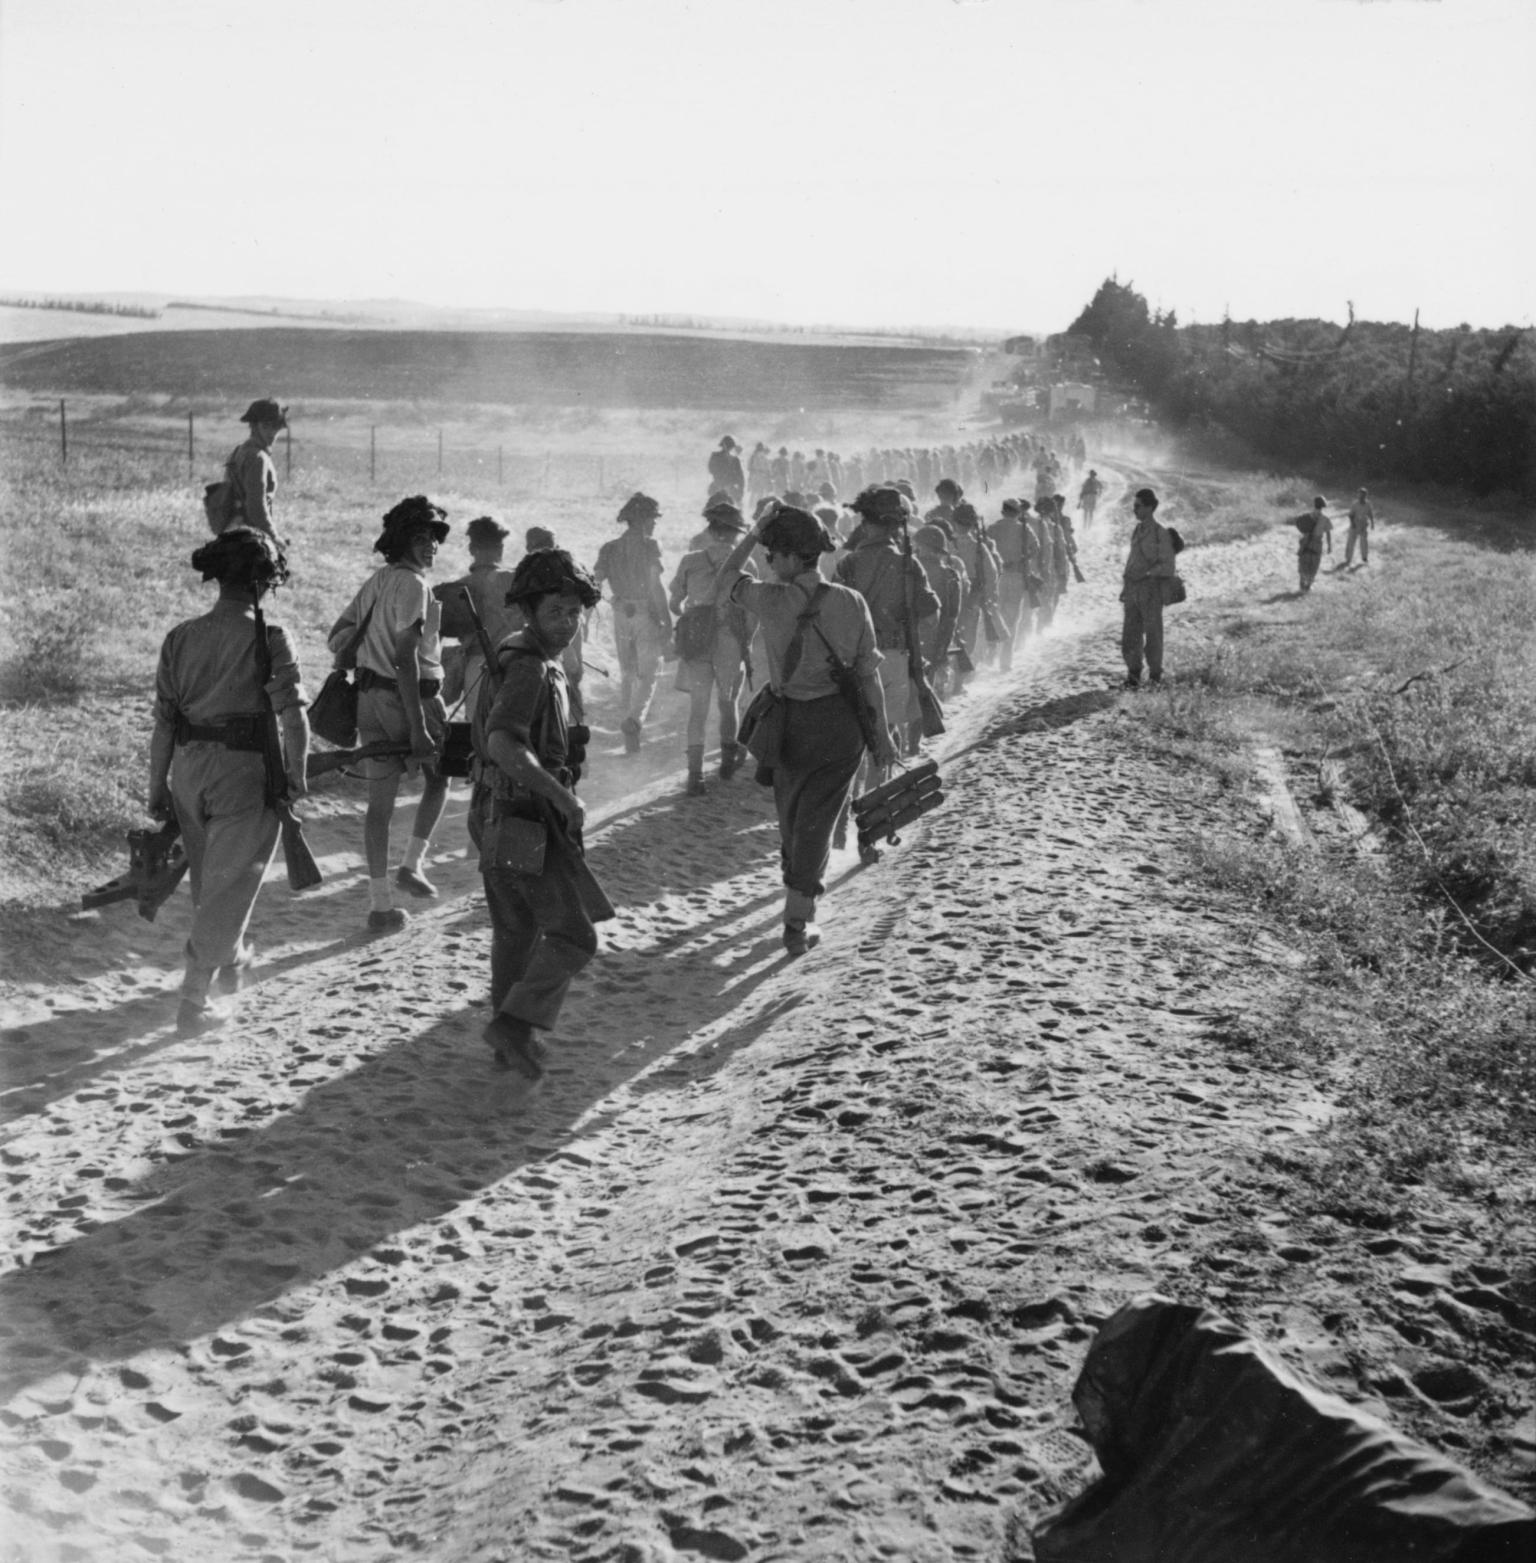 Photograph of troops marching away from the viewer on a sandy trail.